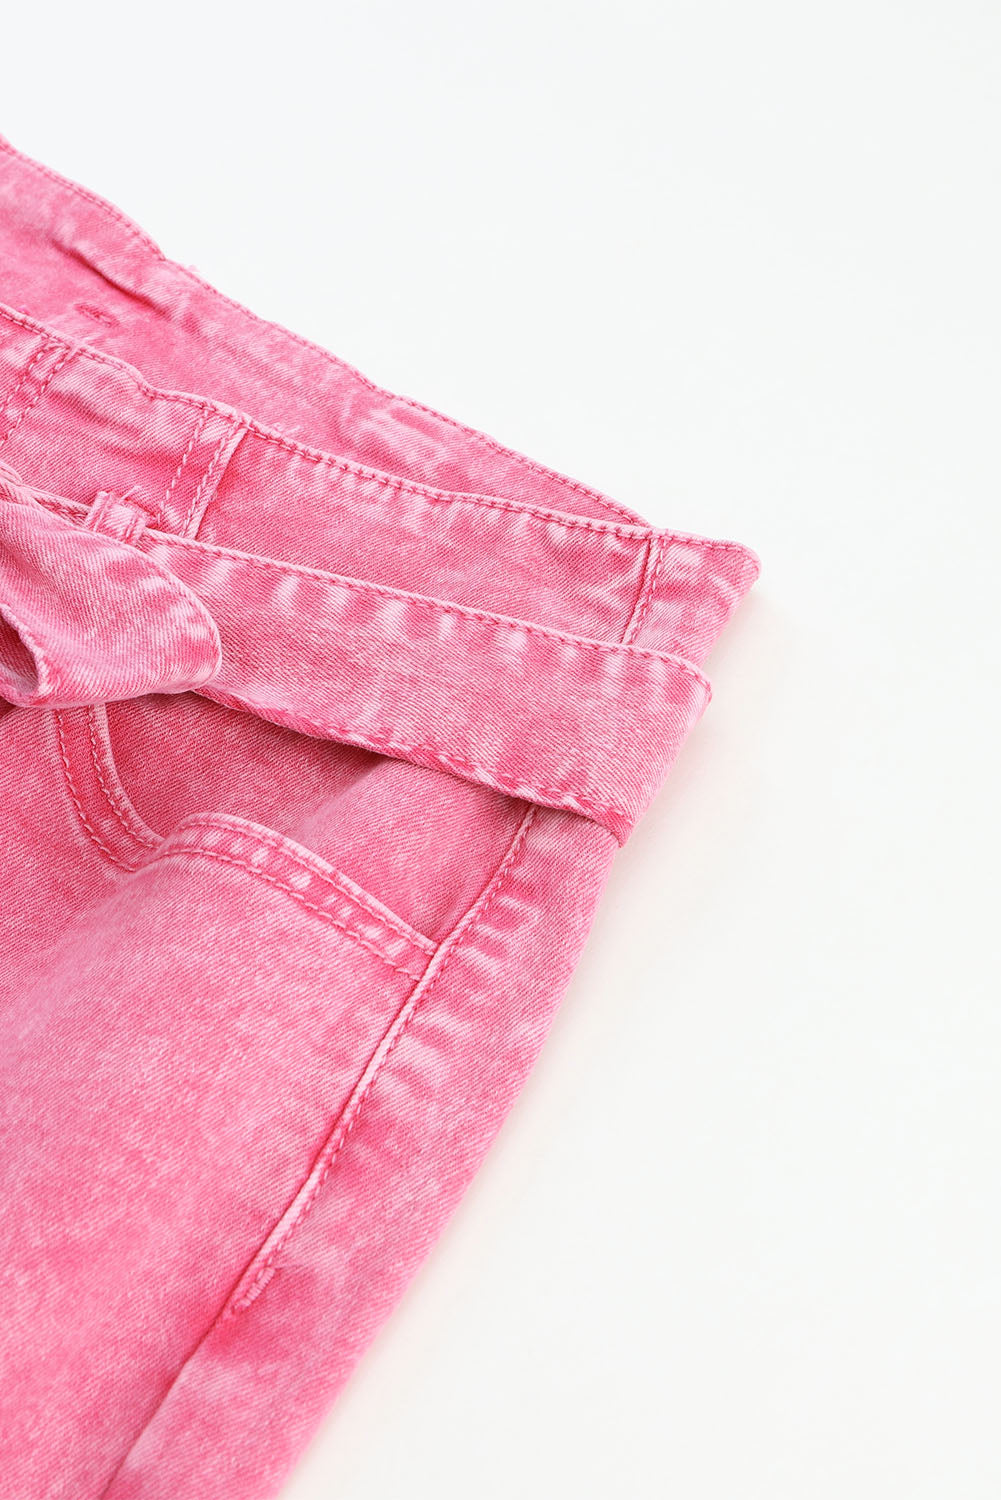 Pink Flare Leg High Waist Front Knot Casual Jeans - SELFTRITSS